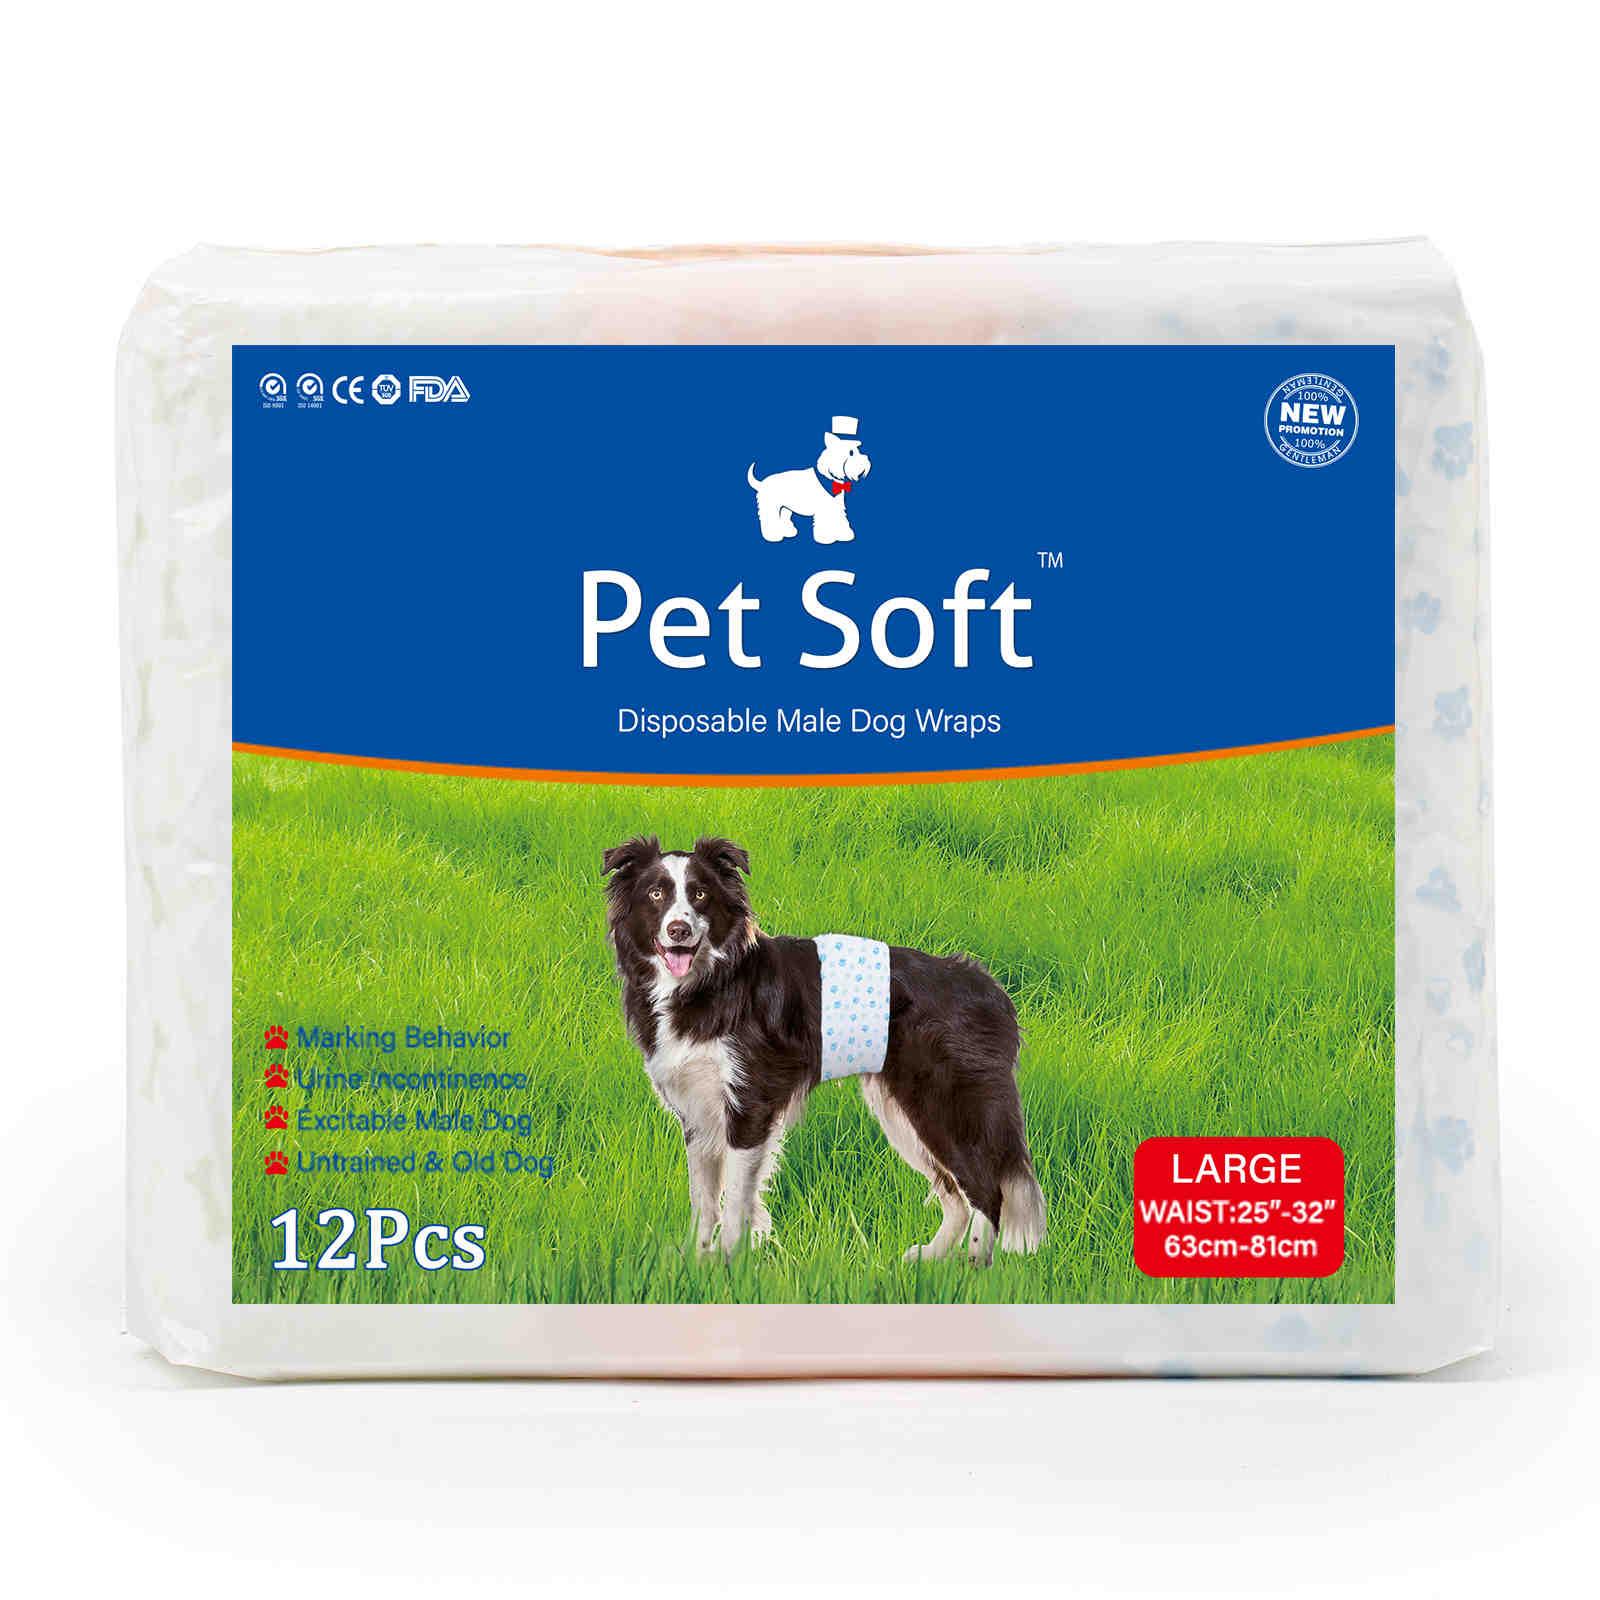 Disposable Male Dog Diapers